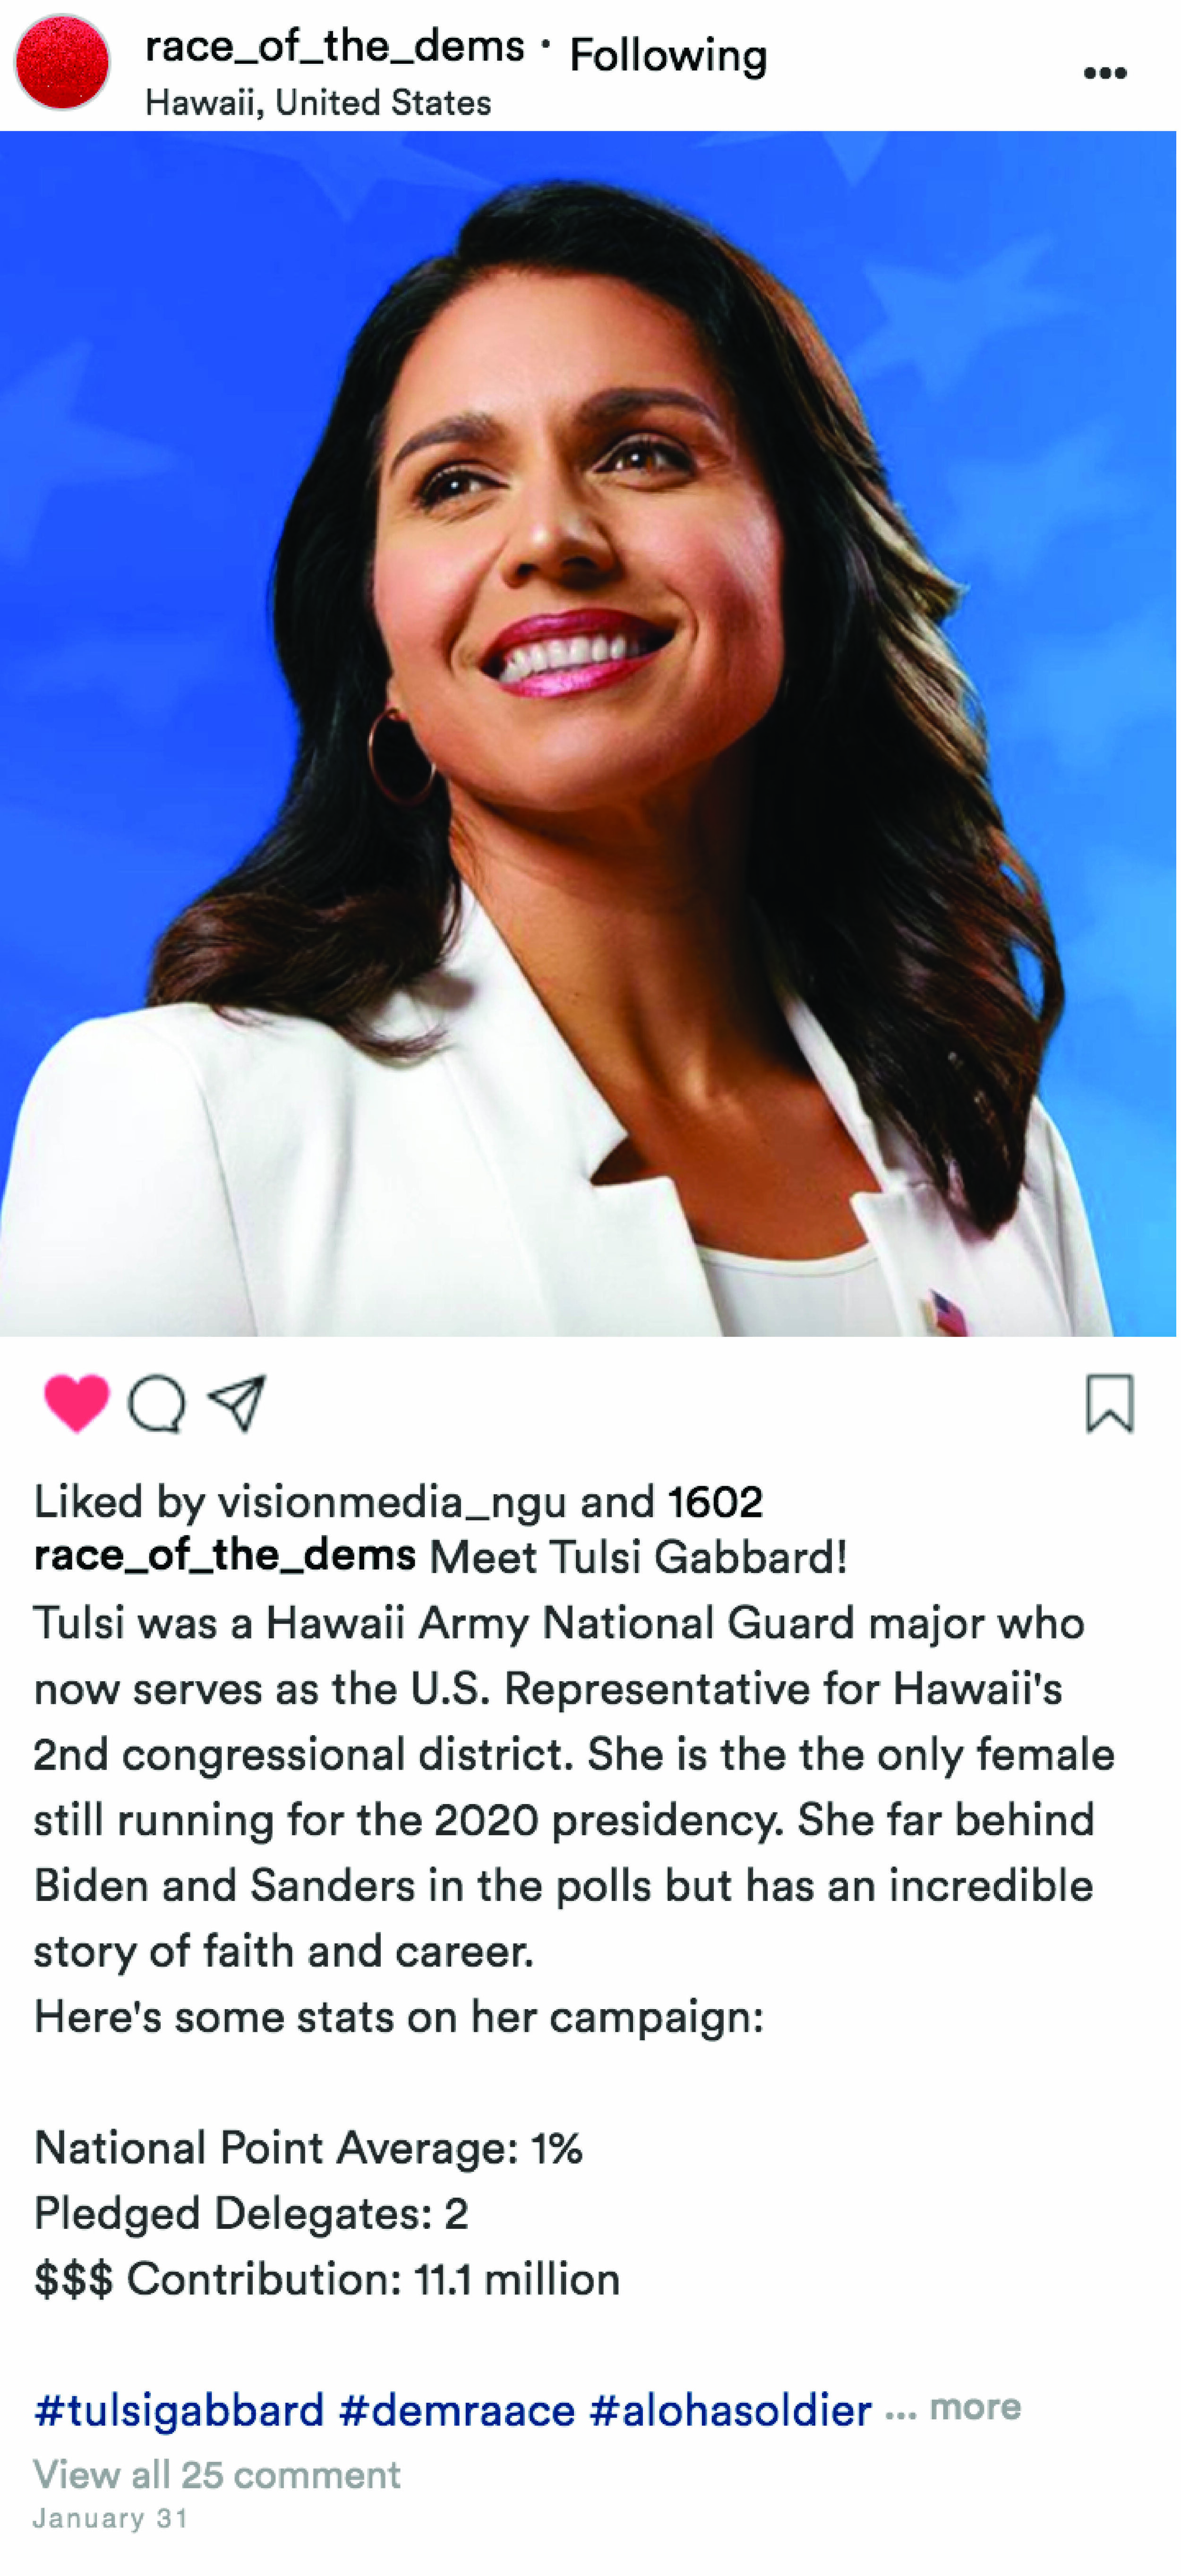 Mock Instagram post about Tulsi Gabbard.Photo courtesy of Tusli Gabbard campaign siteHere are the final three candidates left in the Democratic race. Check out these mock Instagram posts to learn more information about each one.